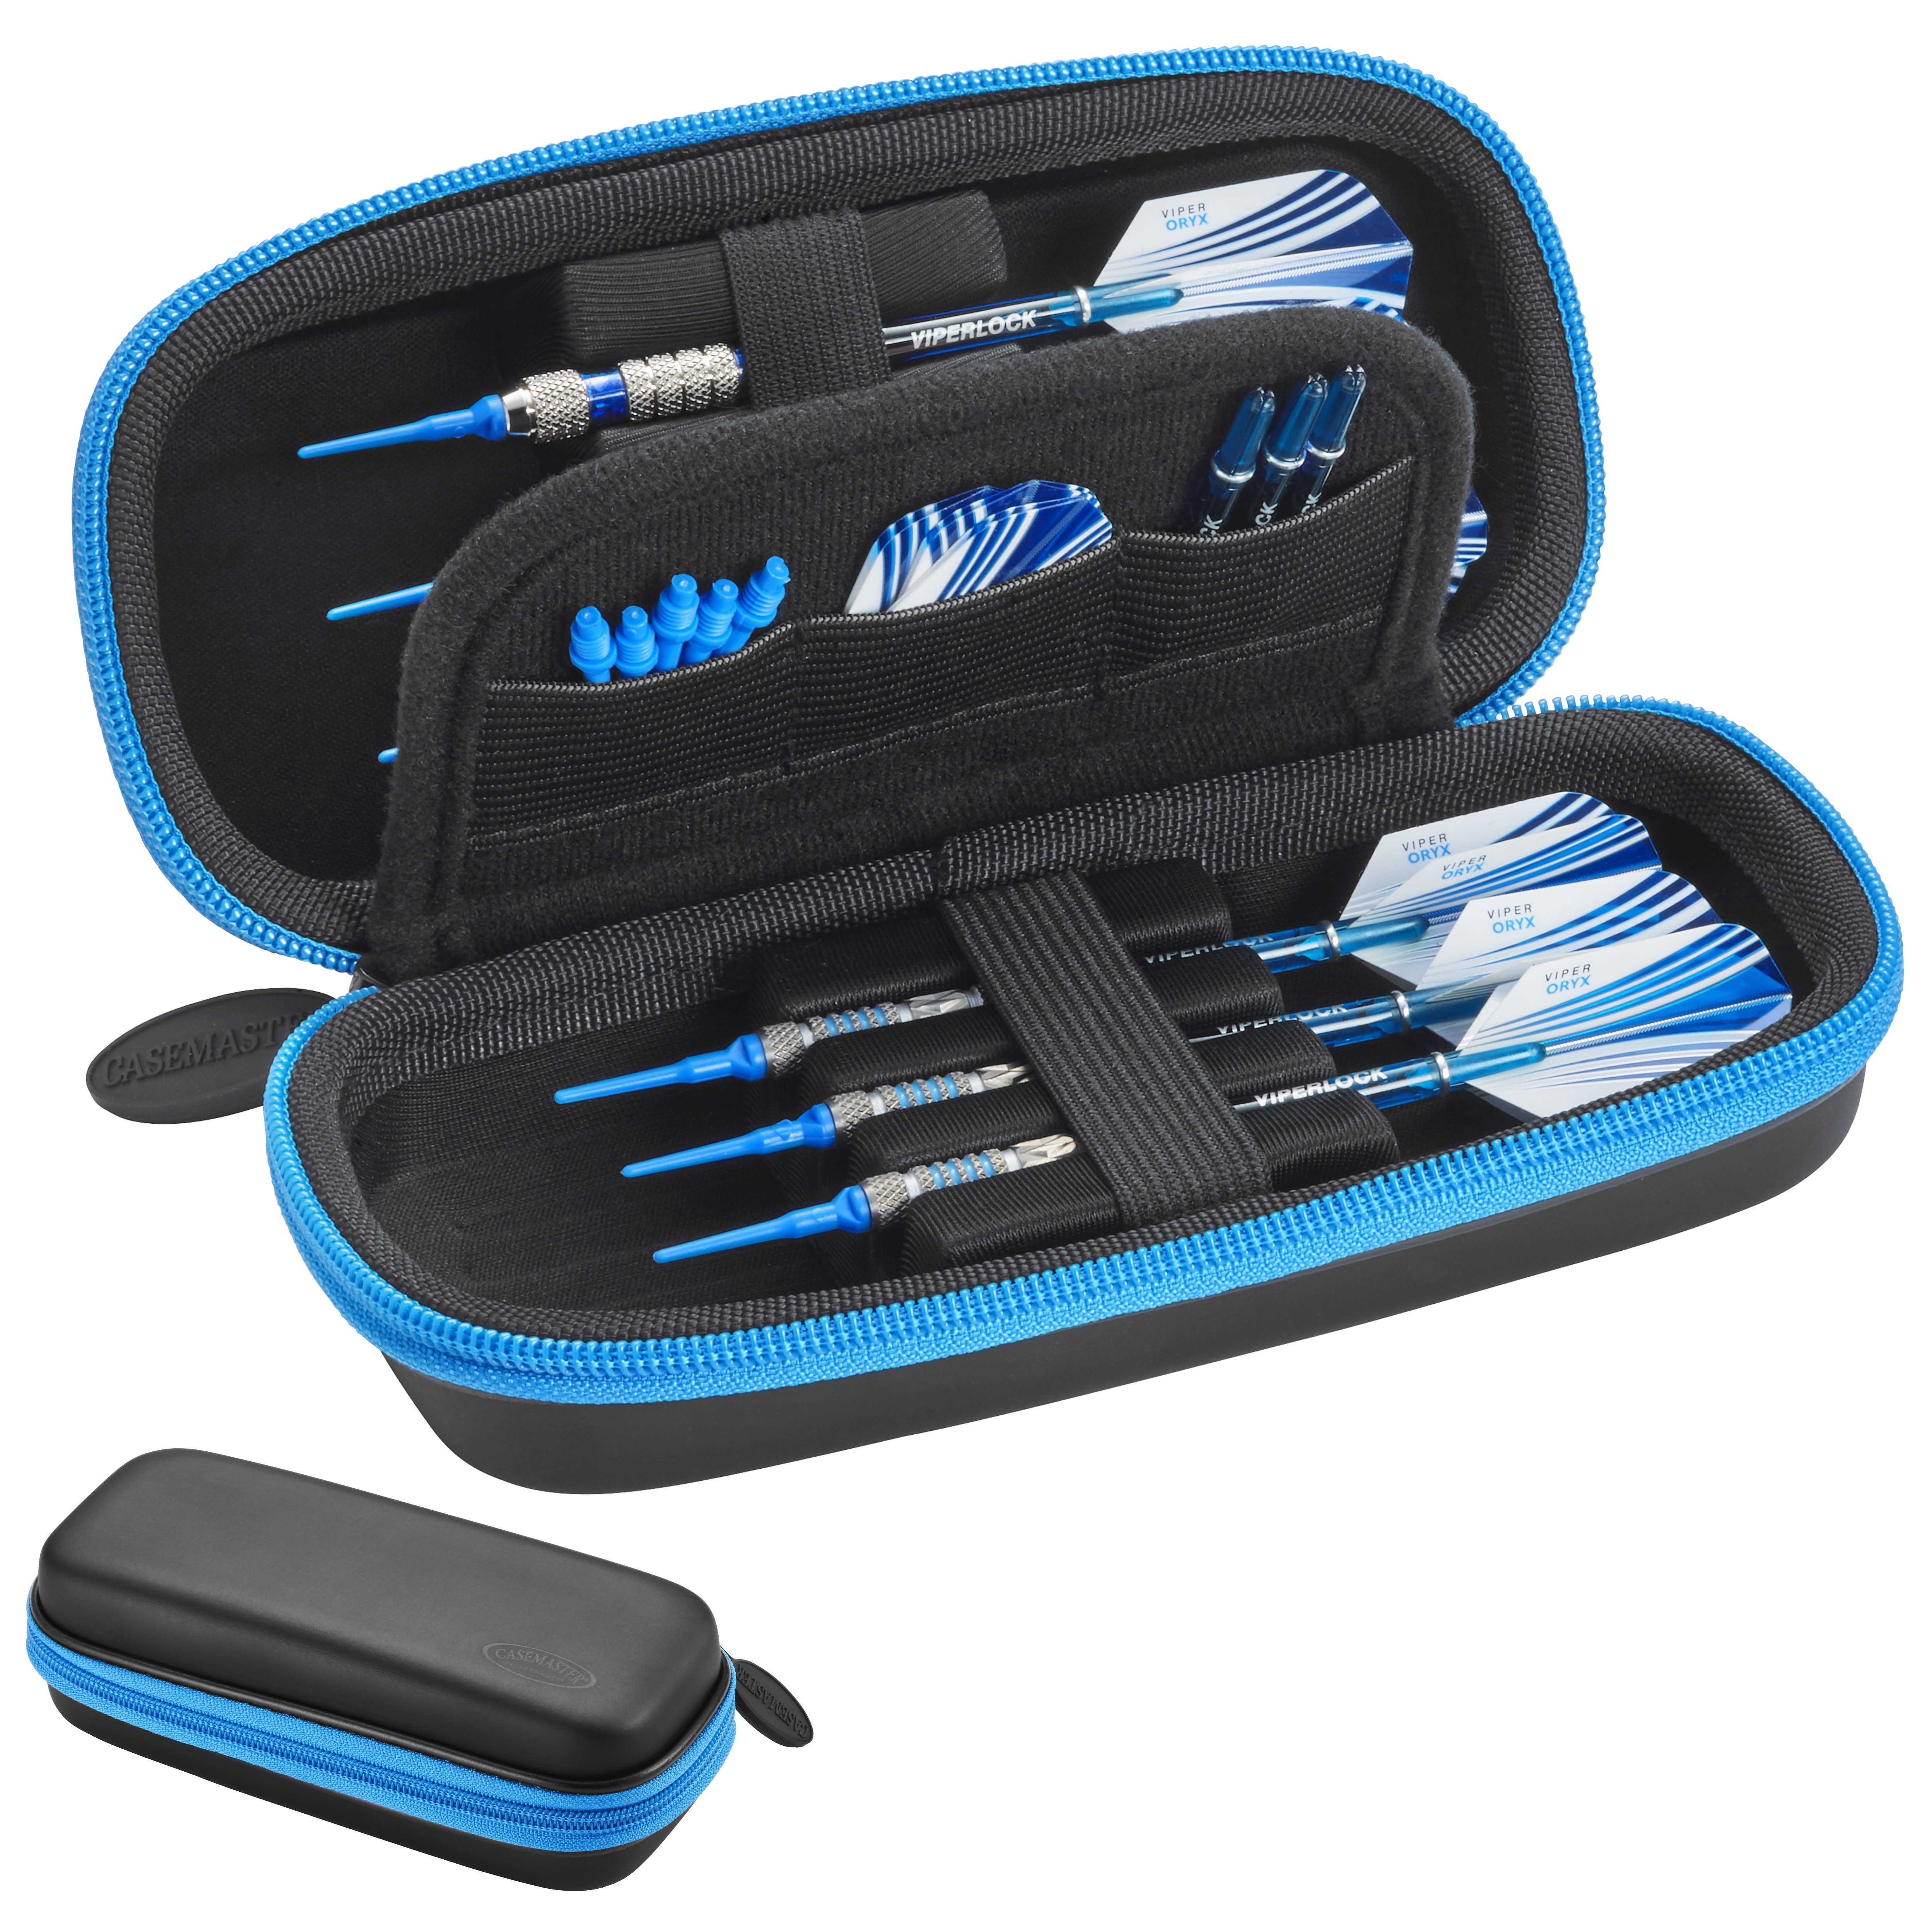 Casemaster Sentry Dart Case, Holds 6 Darts and Accessories, Blue